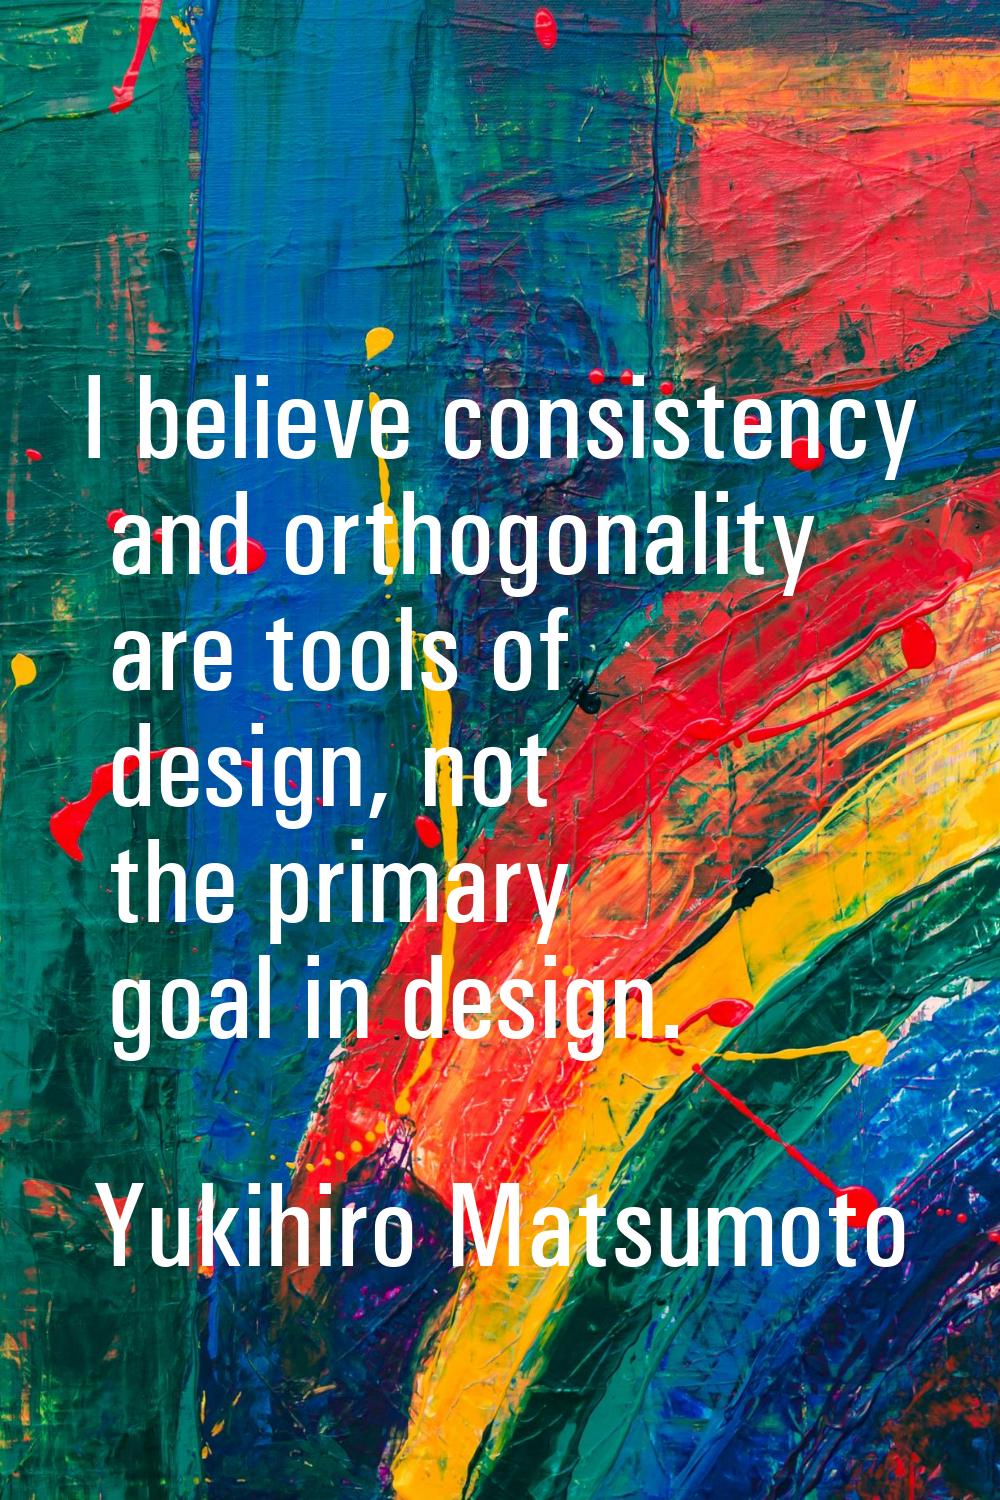 I believe consistency and orthogonality are tools of design, not the primary goal in design.